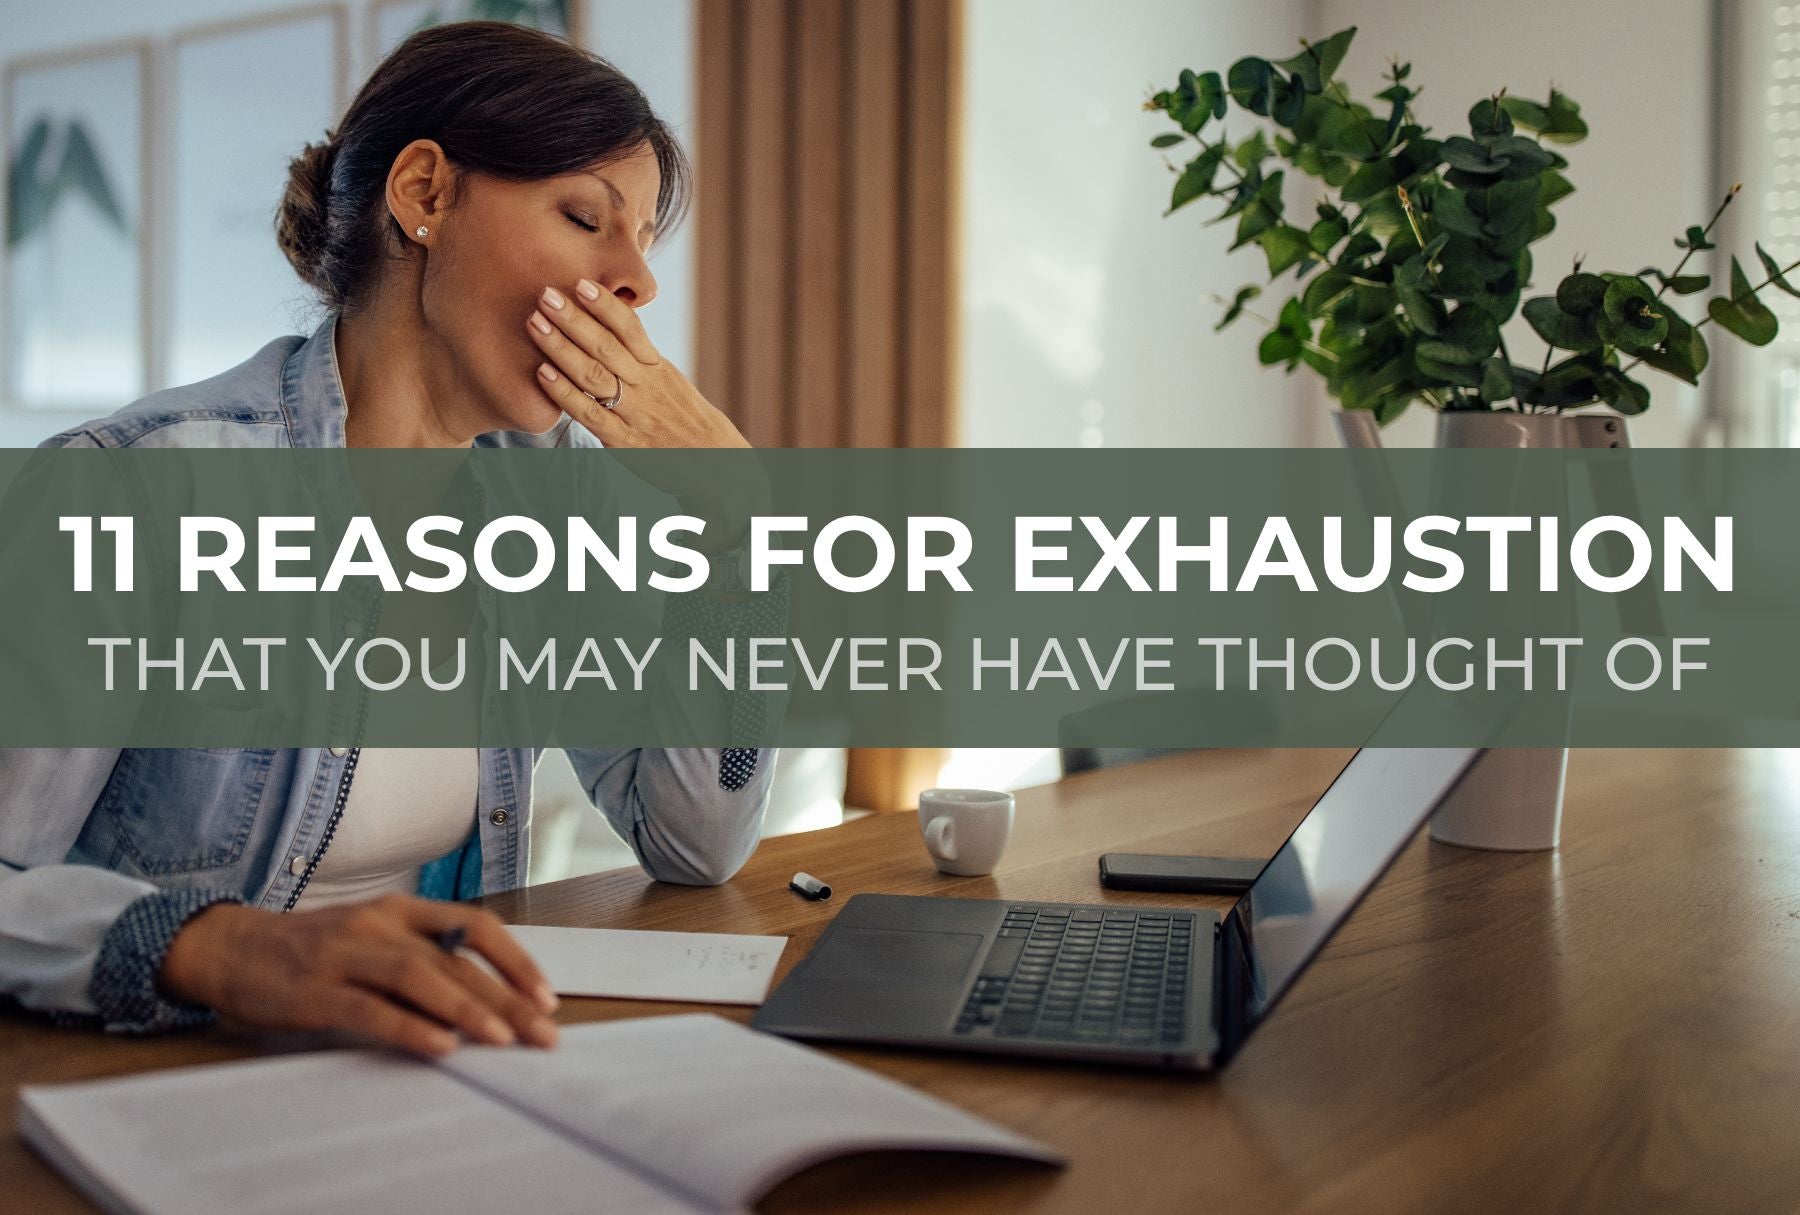 11 Reasons for Exhaustion That You May Never Have Thought Of